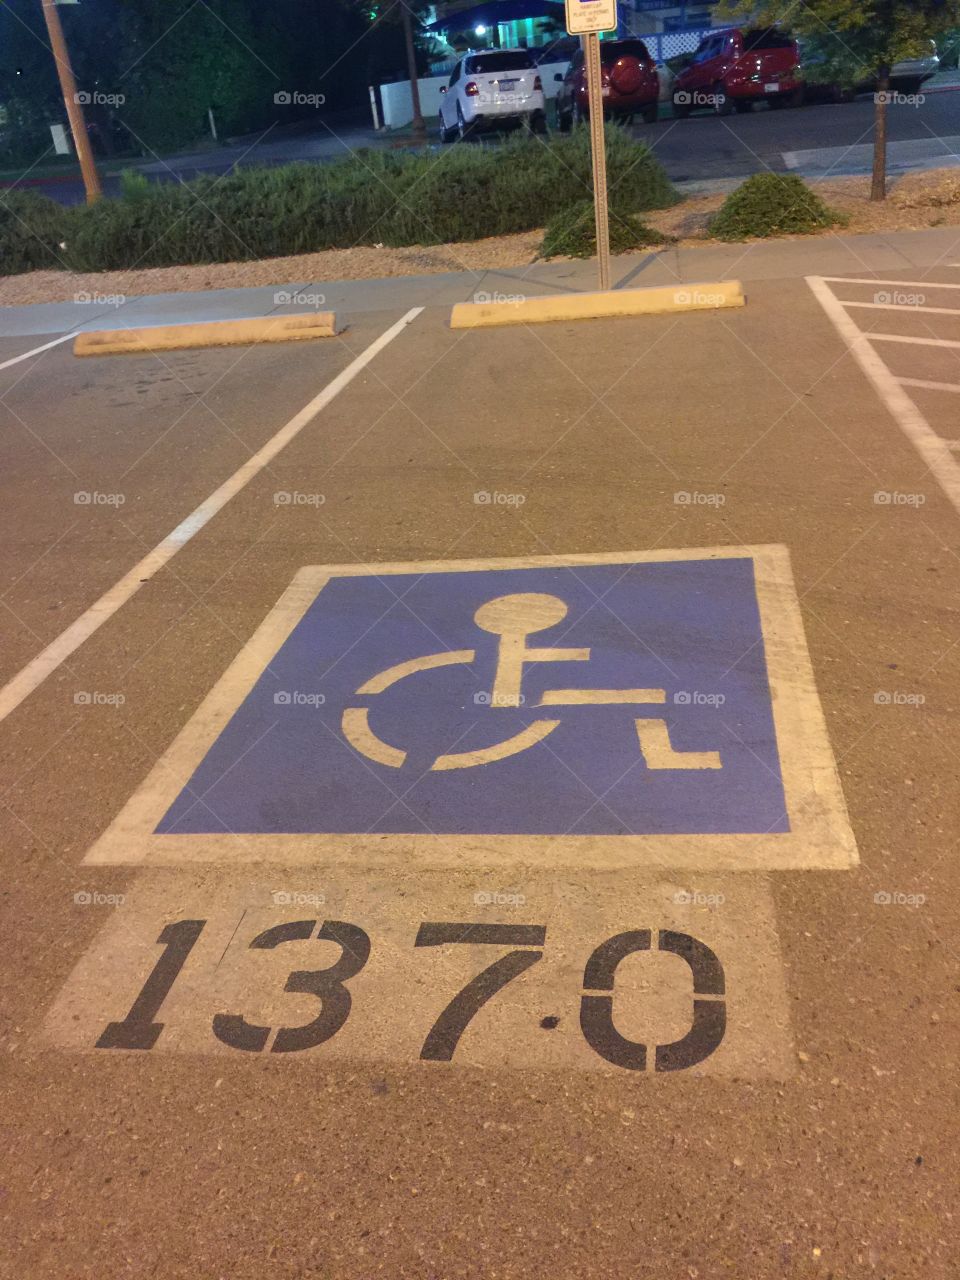 Disable parking space 